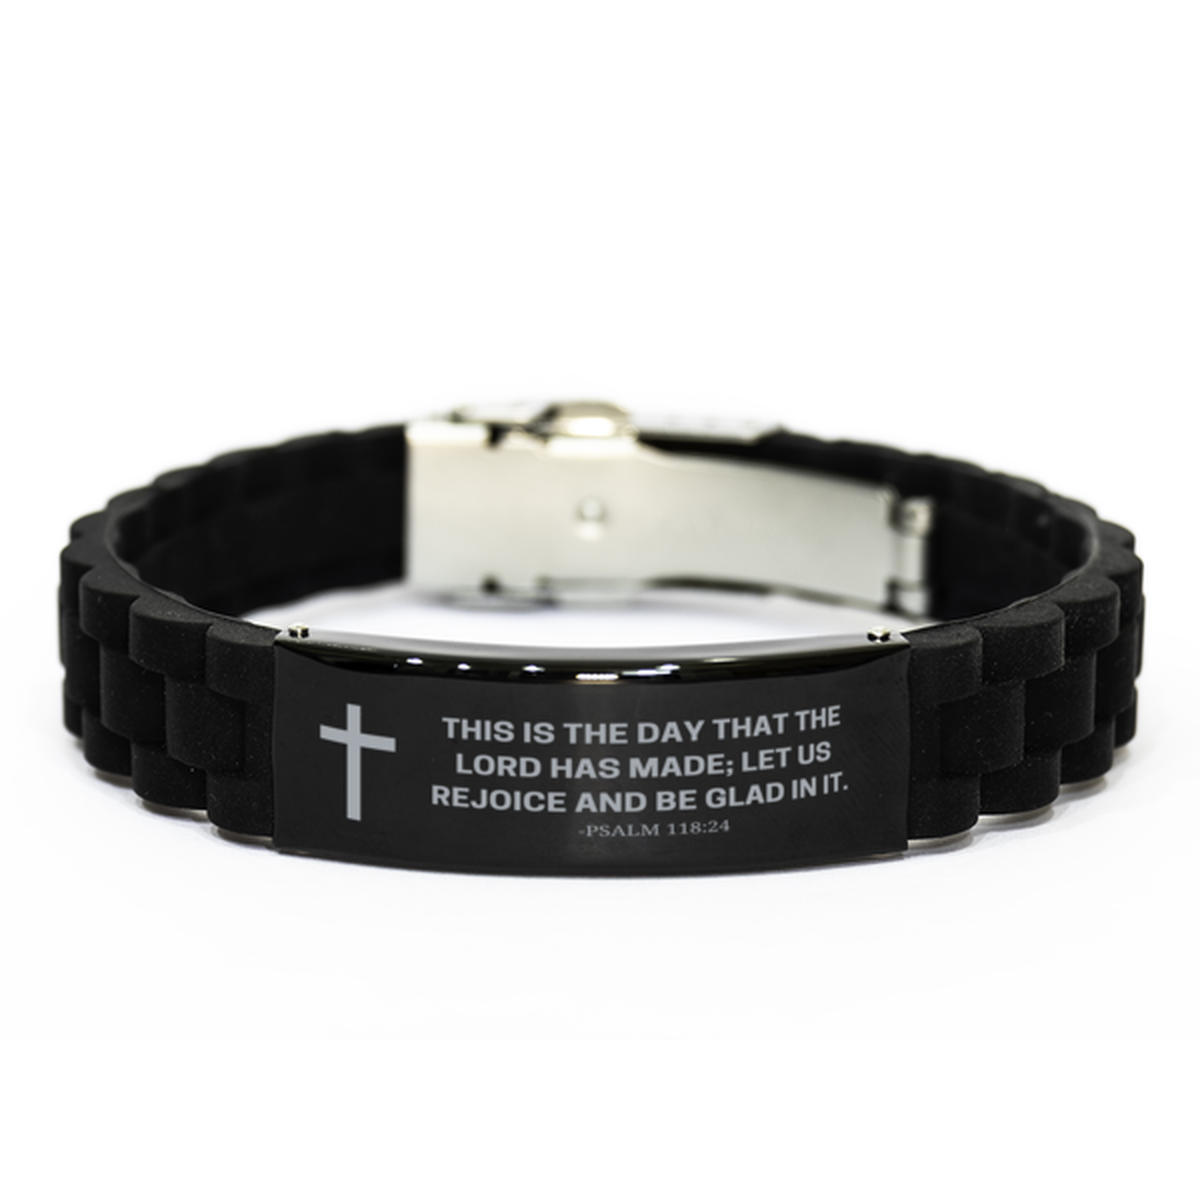 Baptism Gifts For Teenage Boys Girls, Christian Bible Verse Black Glidelock Clasp Bracelet, This is the day that the lord has made, Catholic Confirmation Gifts for Son, Godson, Grandson, Nephew